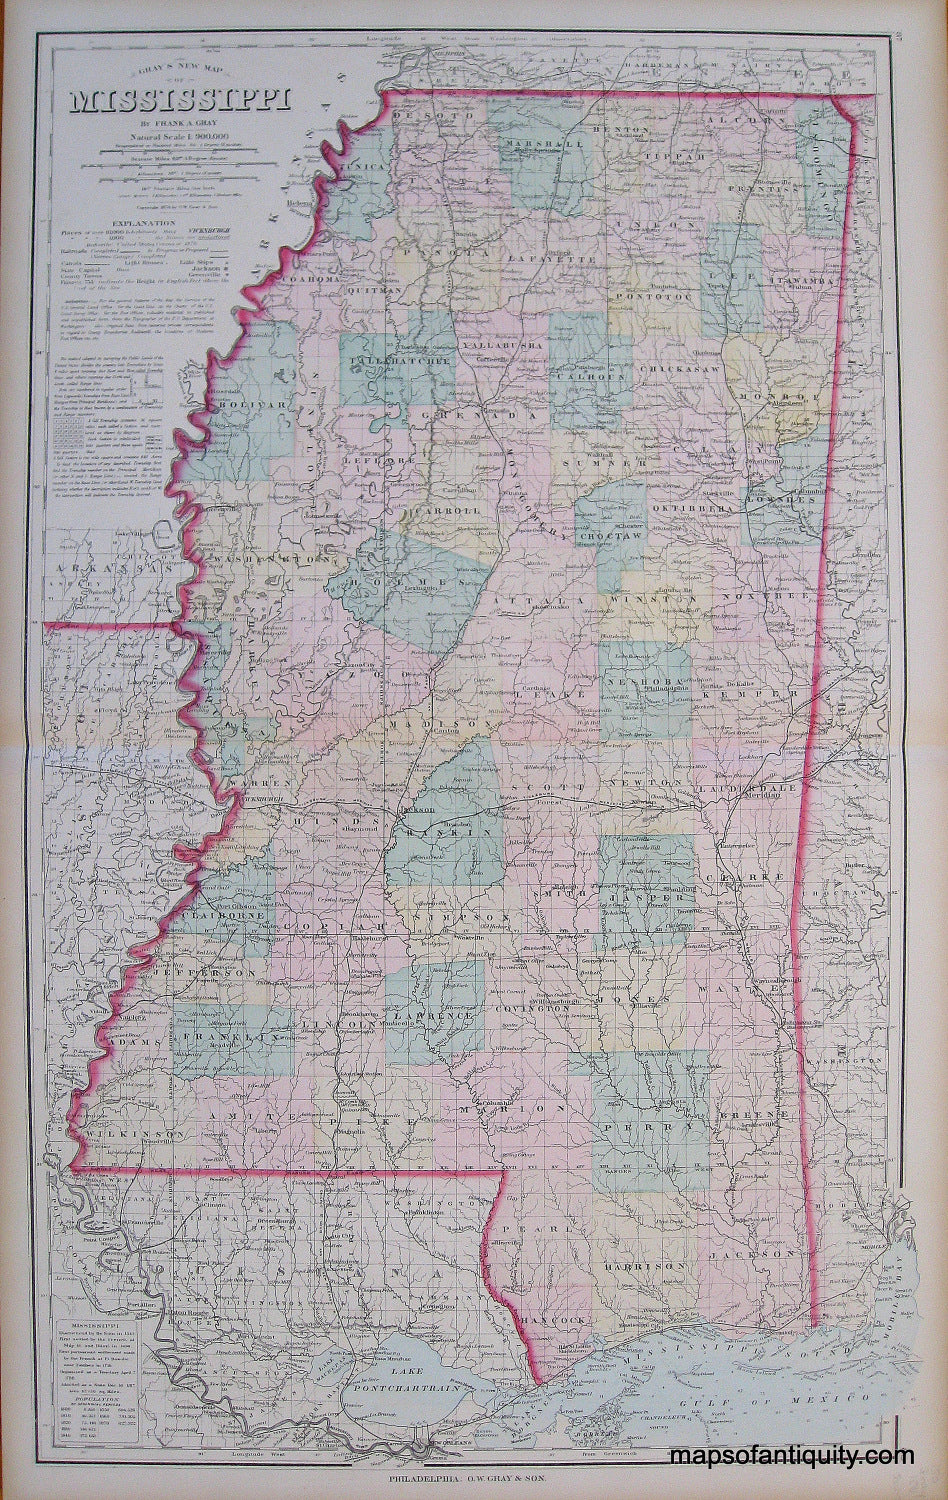 Antique-Hand-Colored-Map-Mississippi-United-States-Mississippi-1881-Gray-Maps-Of-Antiquity